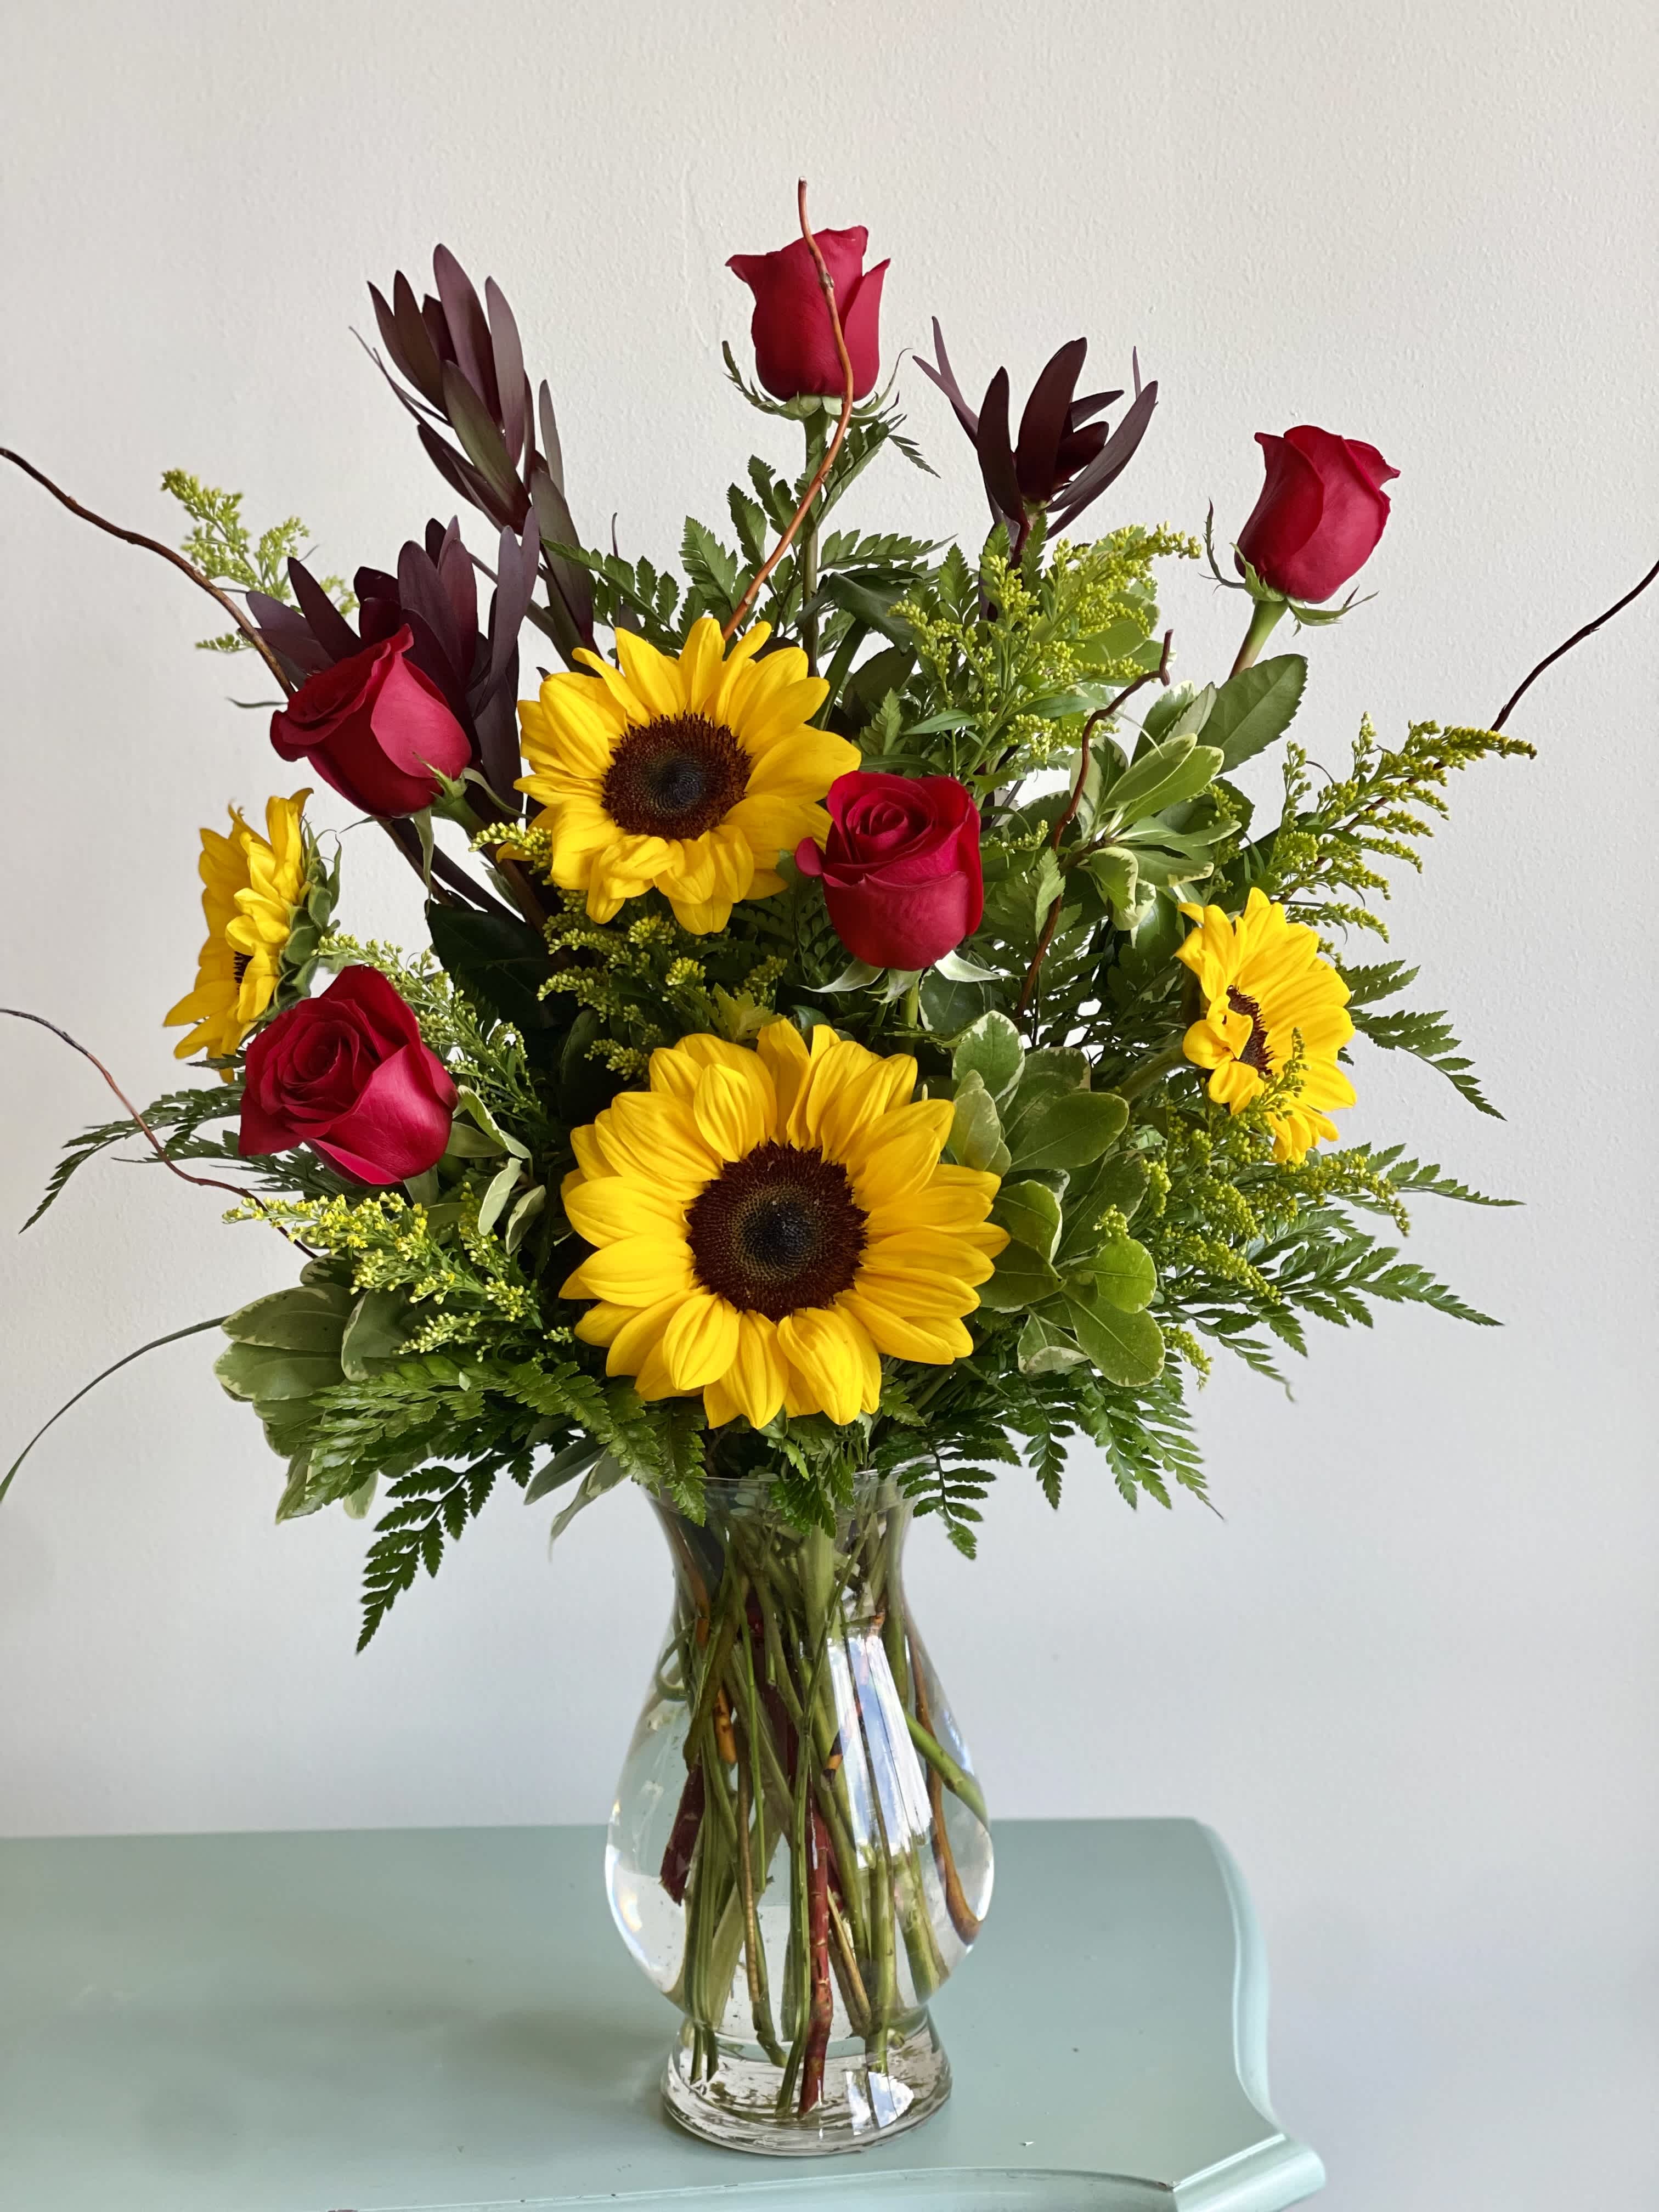 Sunsation - A sensational arrangement of buttery sunflowers, scarlet roses accented with solidago and lush foliage will bring bright smiles from the recipient.